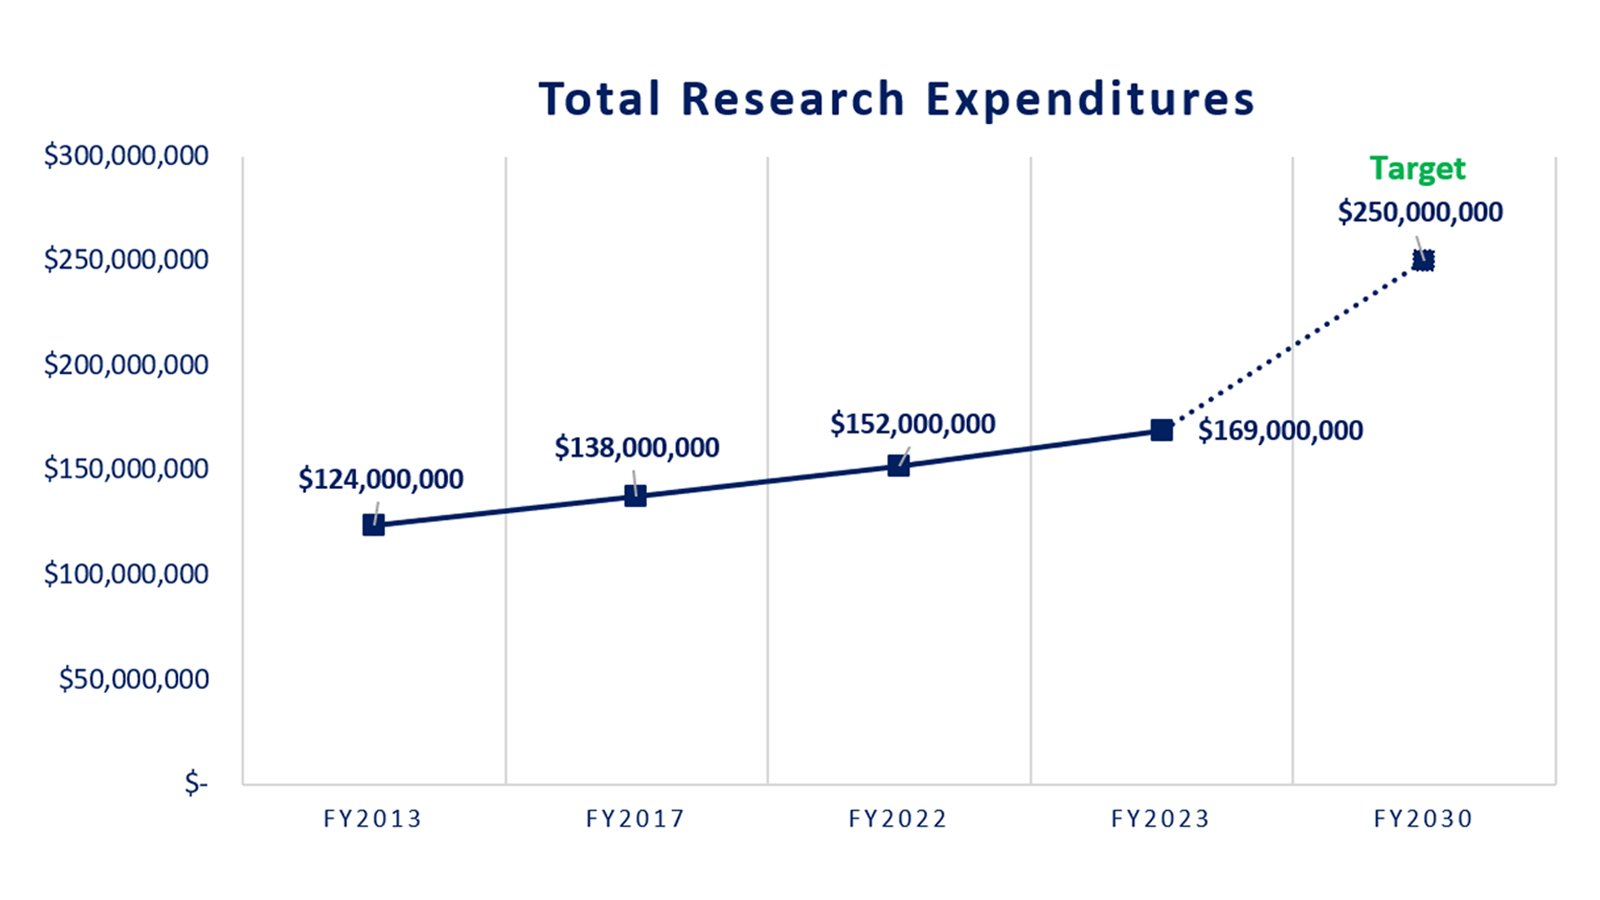 Drexel University’s total research expenditures as reported by the National Science Foundation Higher Education Research and Development is $169MM (2023). Through the Research Impact imperative, our goal is to increase Drexel’s research expenditures to $250MM by 2030.